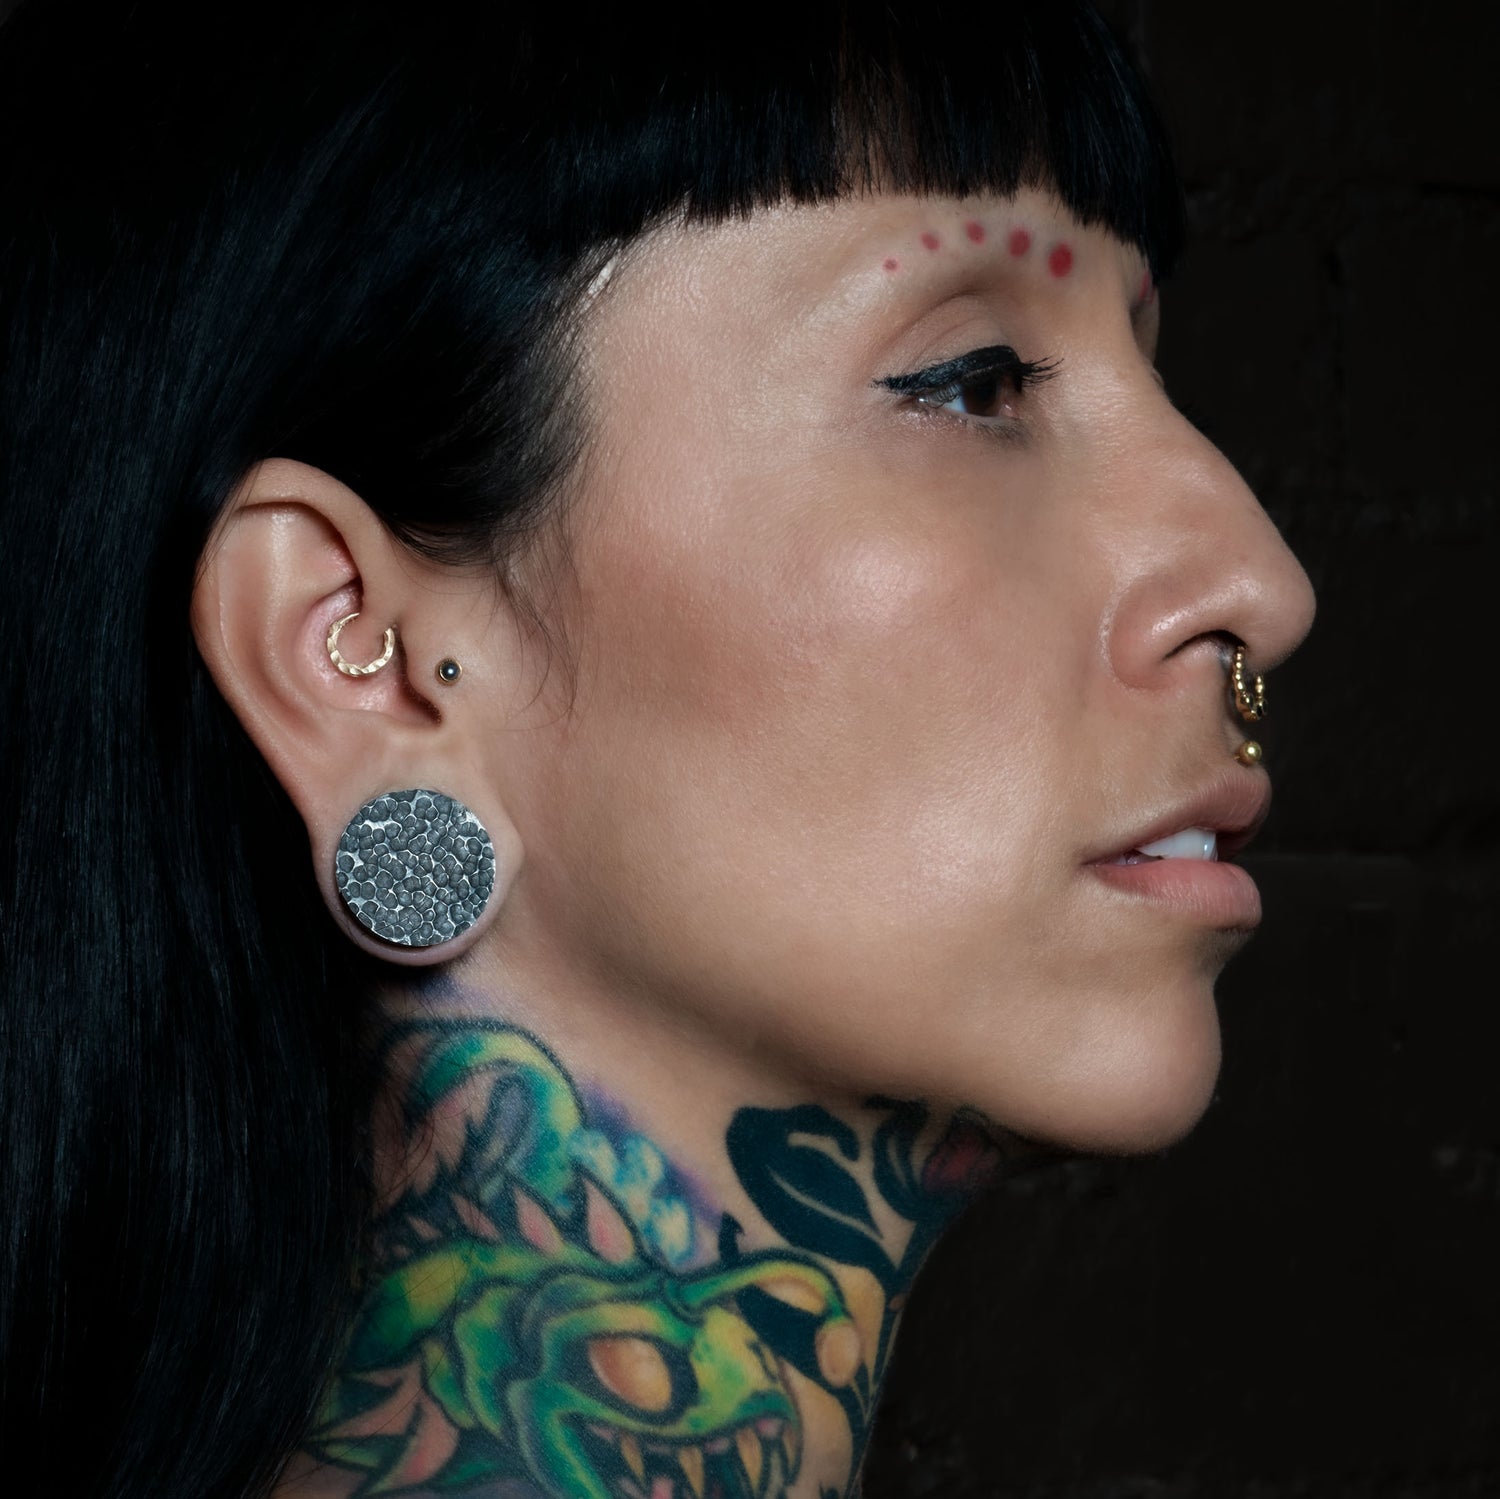 model wearing hammered black silver double flared ear plug